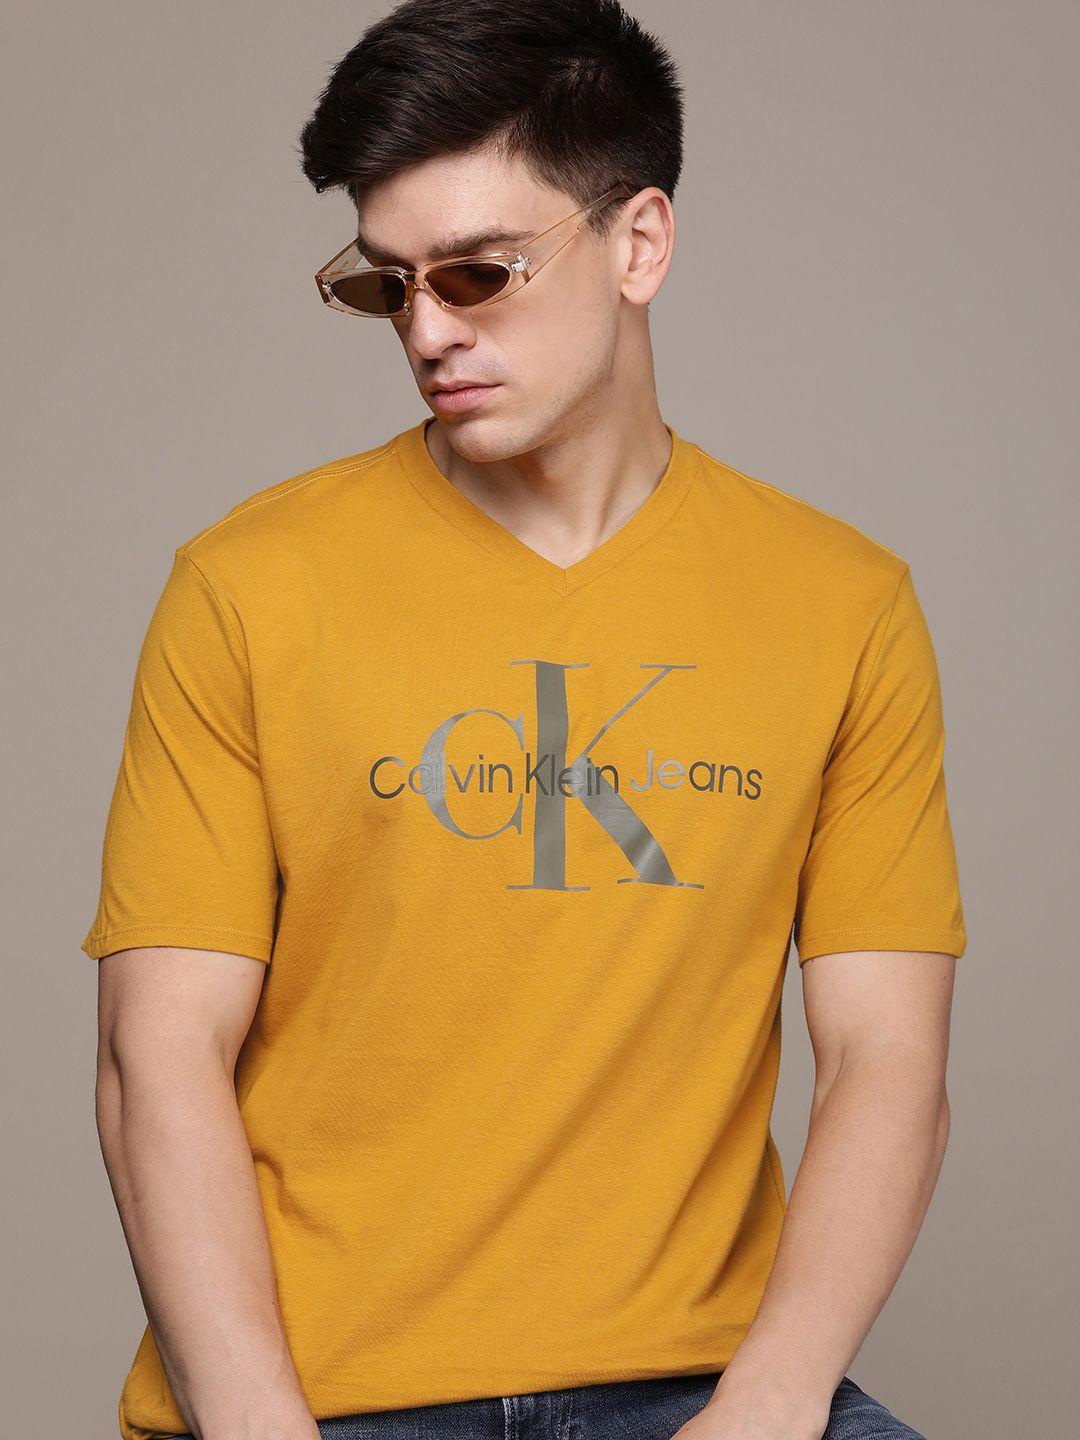 calvin klein jeans pure cotton brand logo printed v neck casual t-shirt